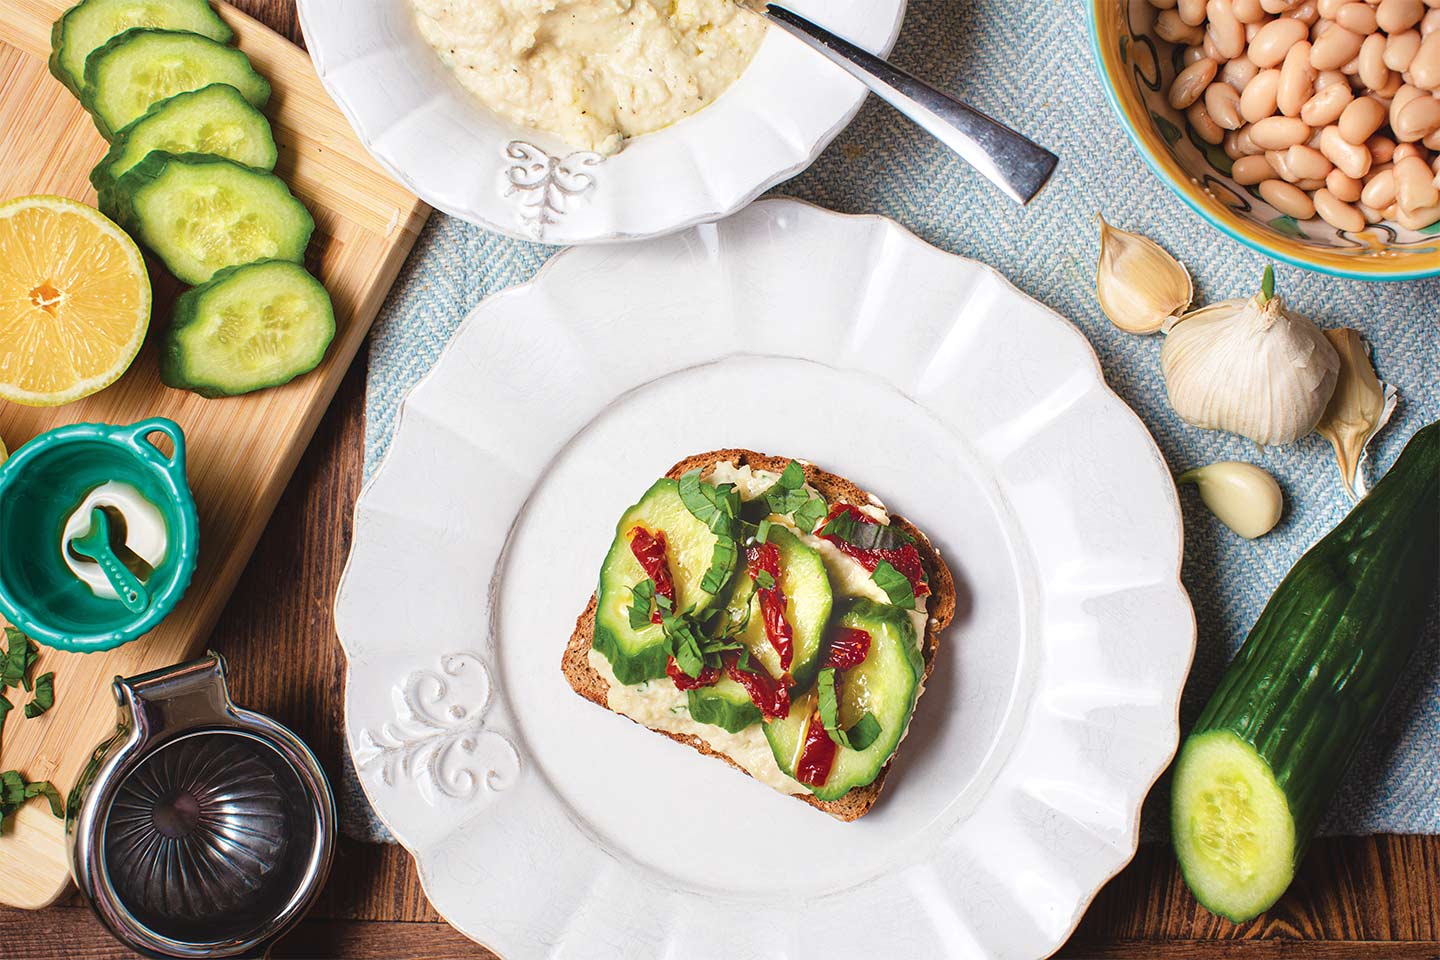 Cucumber and White Bean Toast with sun-dried tomatoes on top